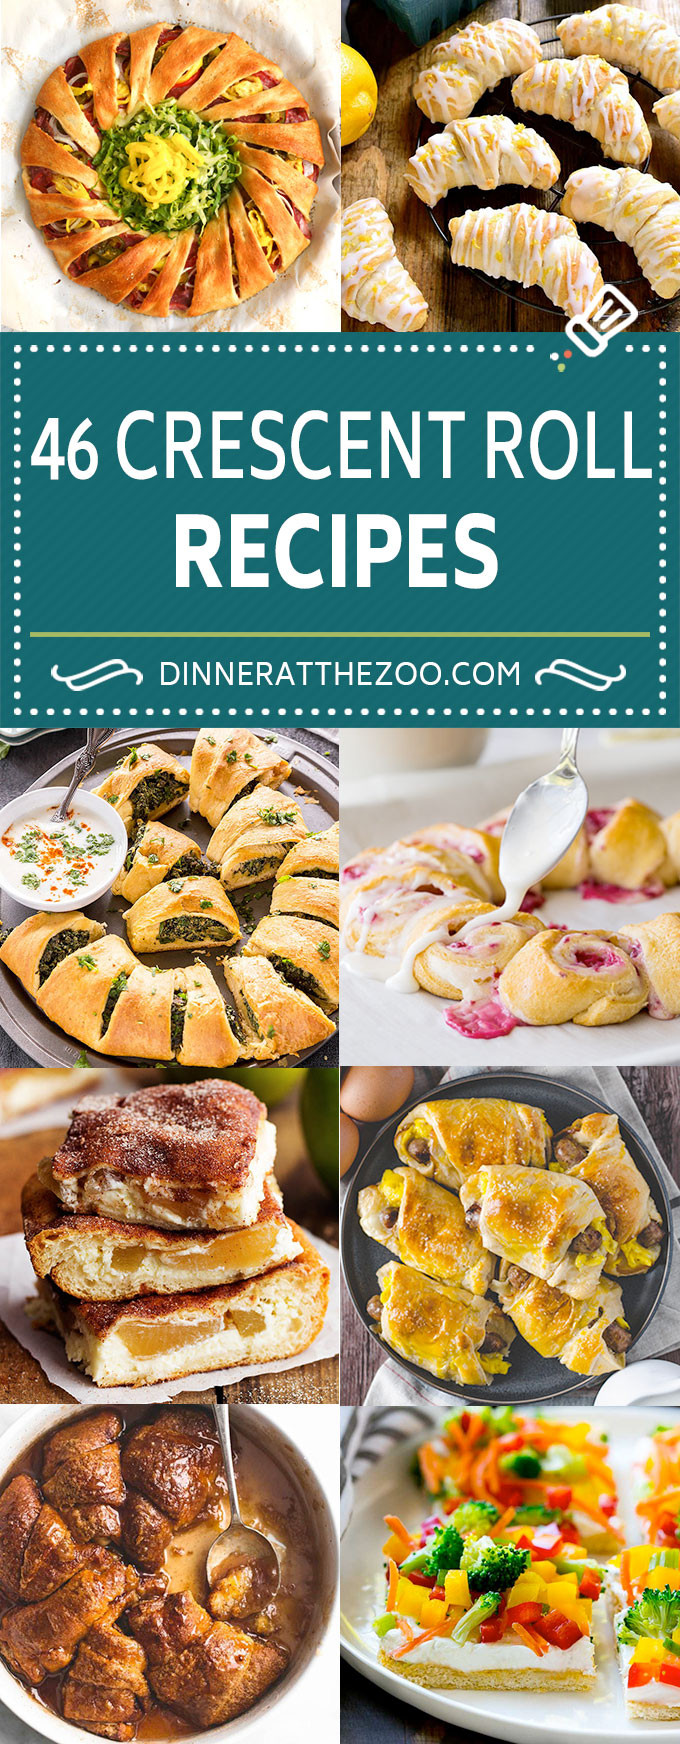 Appetizers With Crescent Rolls
 46 Crescent Roll Recipes Dinner at the Zoo